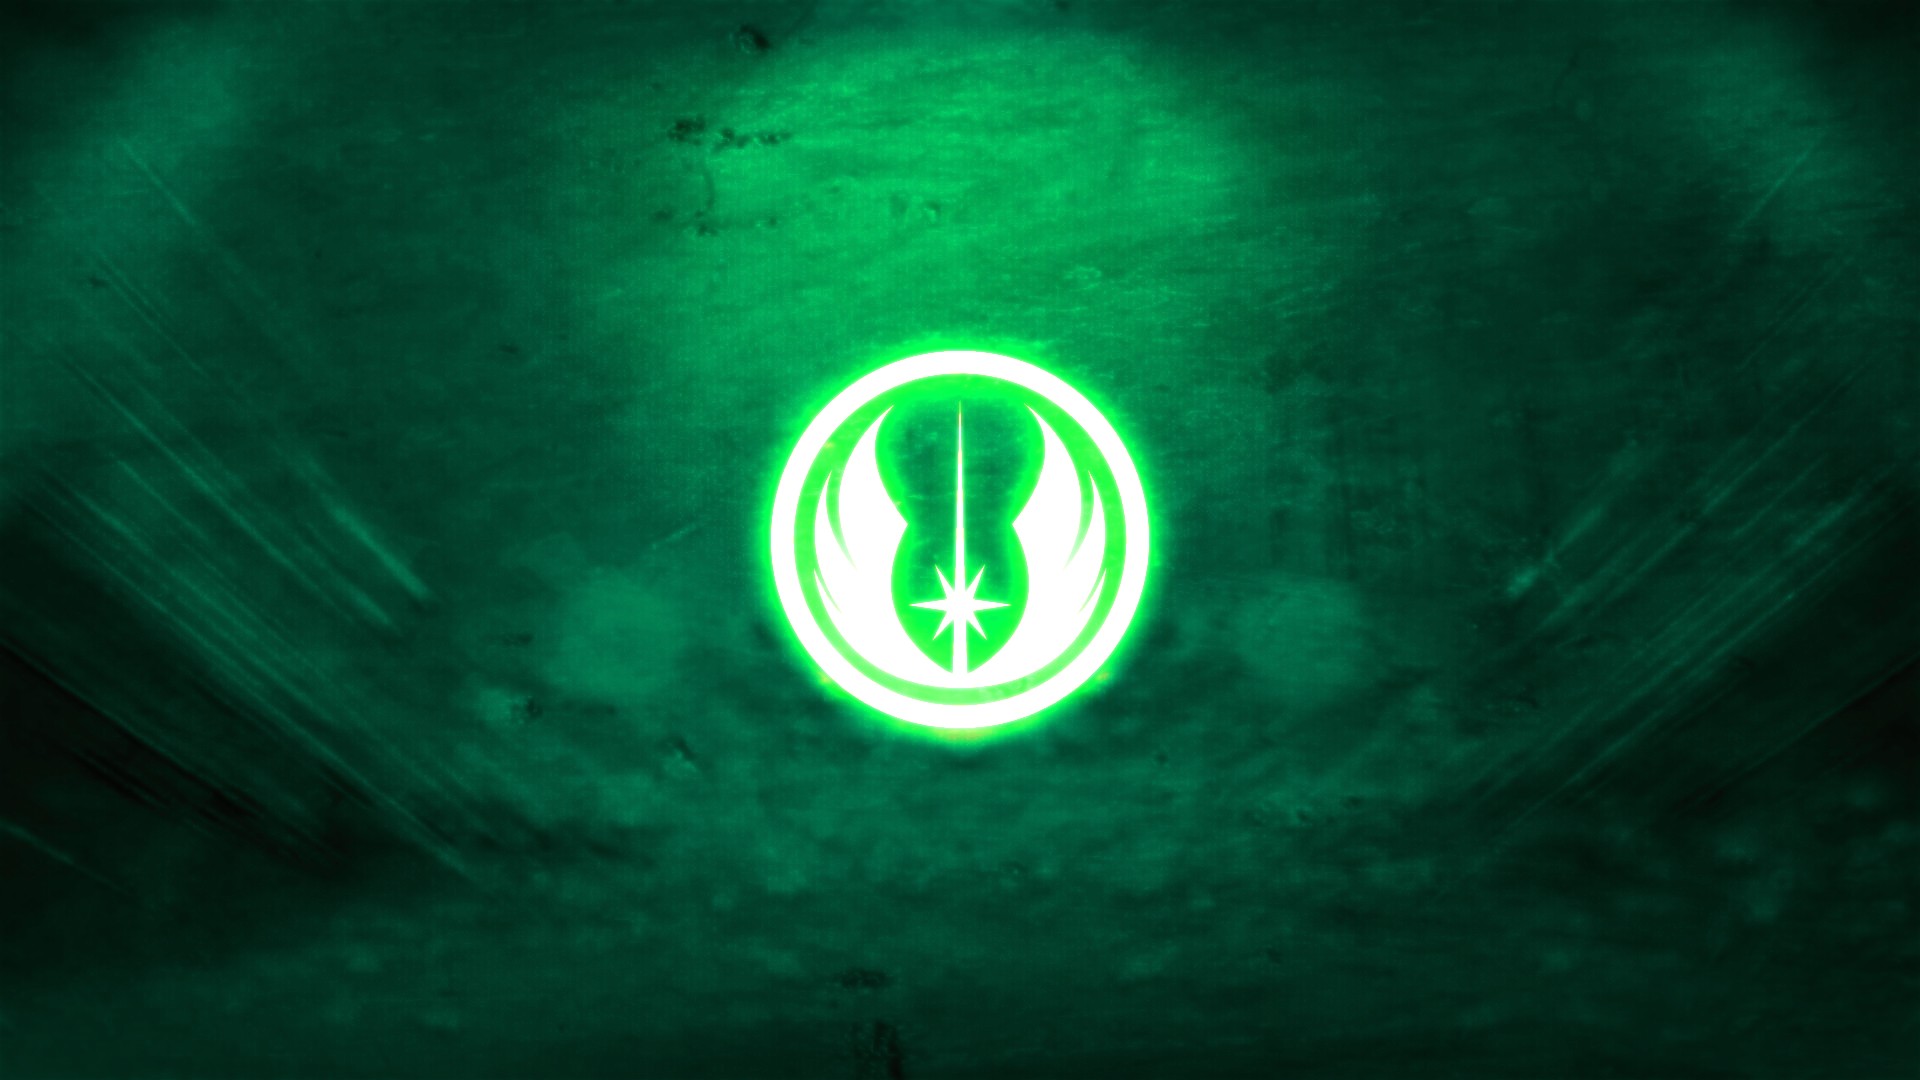 General 1920x1080 Star Wars green background texture science fiction logo